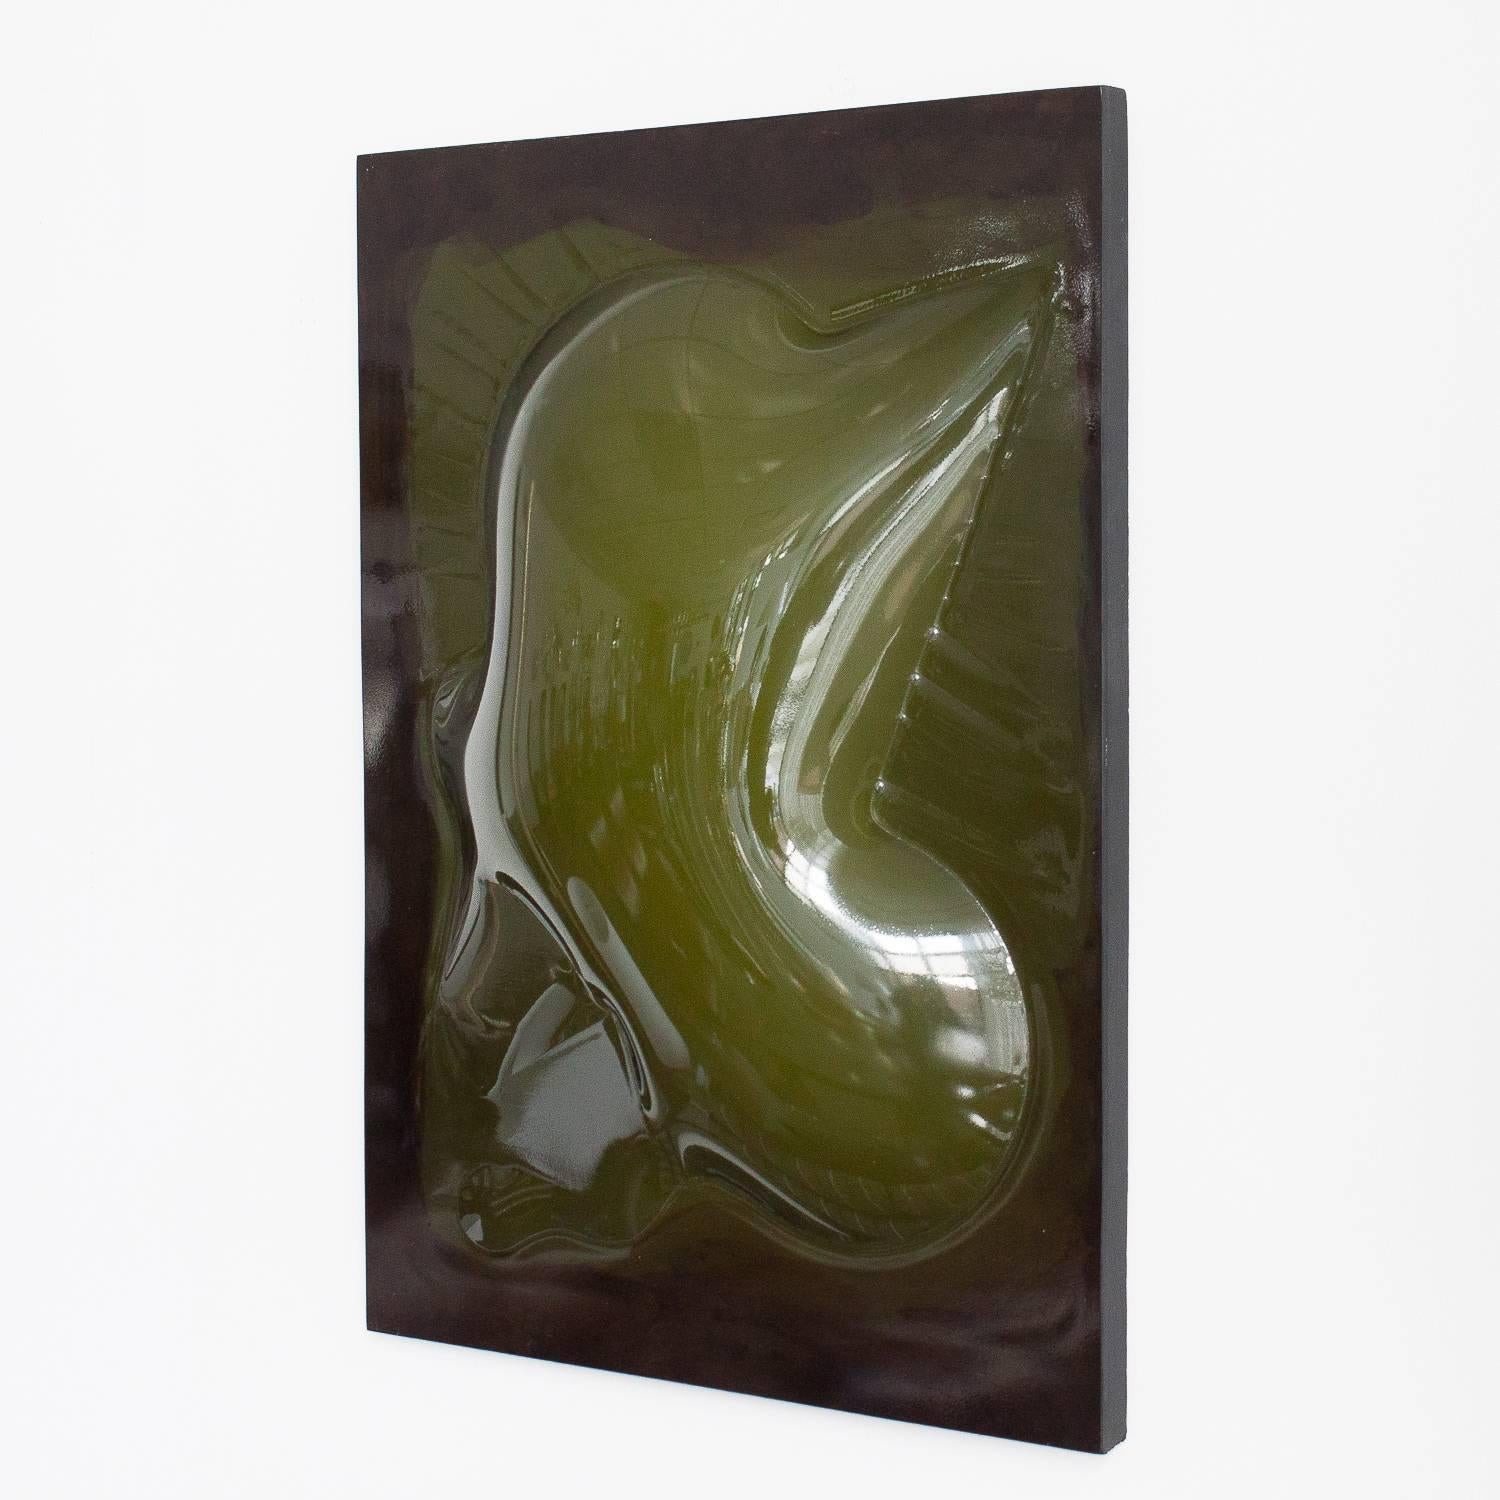 Unique 1970s vacuum formed plexi wall sculpture by artist Niel Fiertel. Abstract free-form shaped smoked acrylic / plexi sheet affixed to green painted wood backing. The raised bubbled area is clear showing the color behind. This modern artwork can